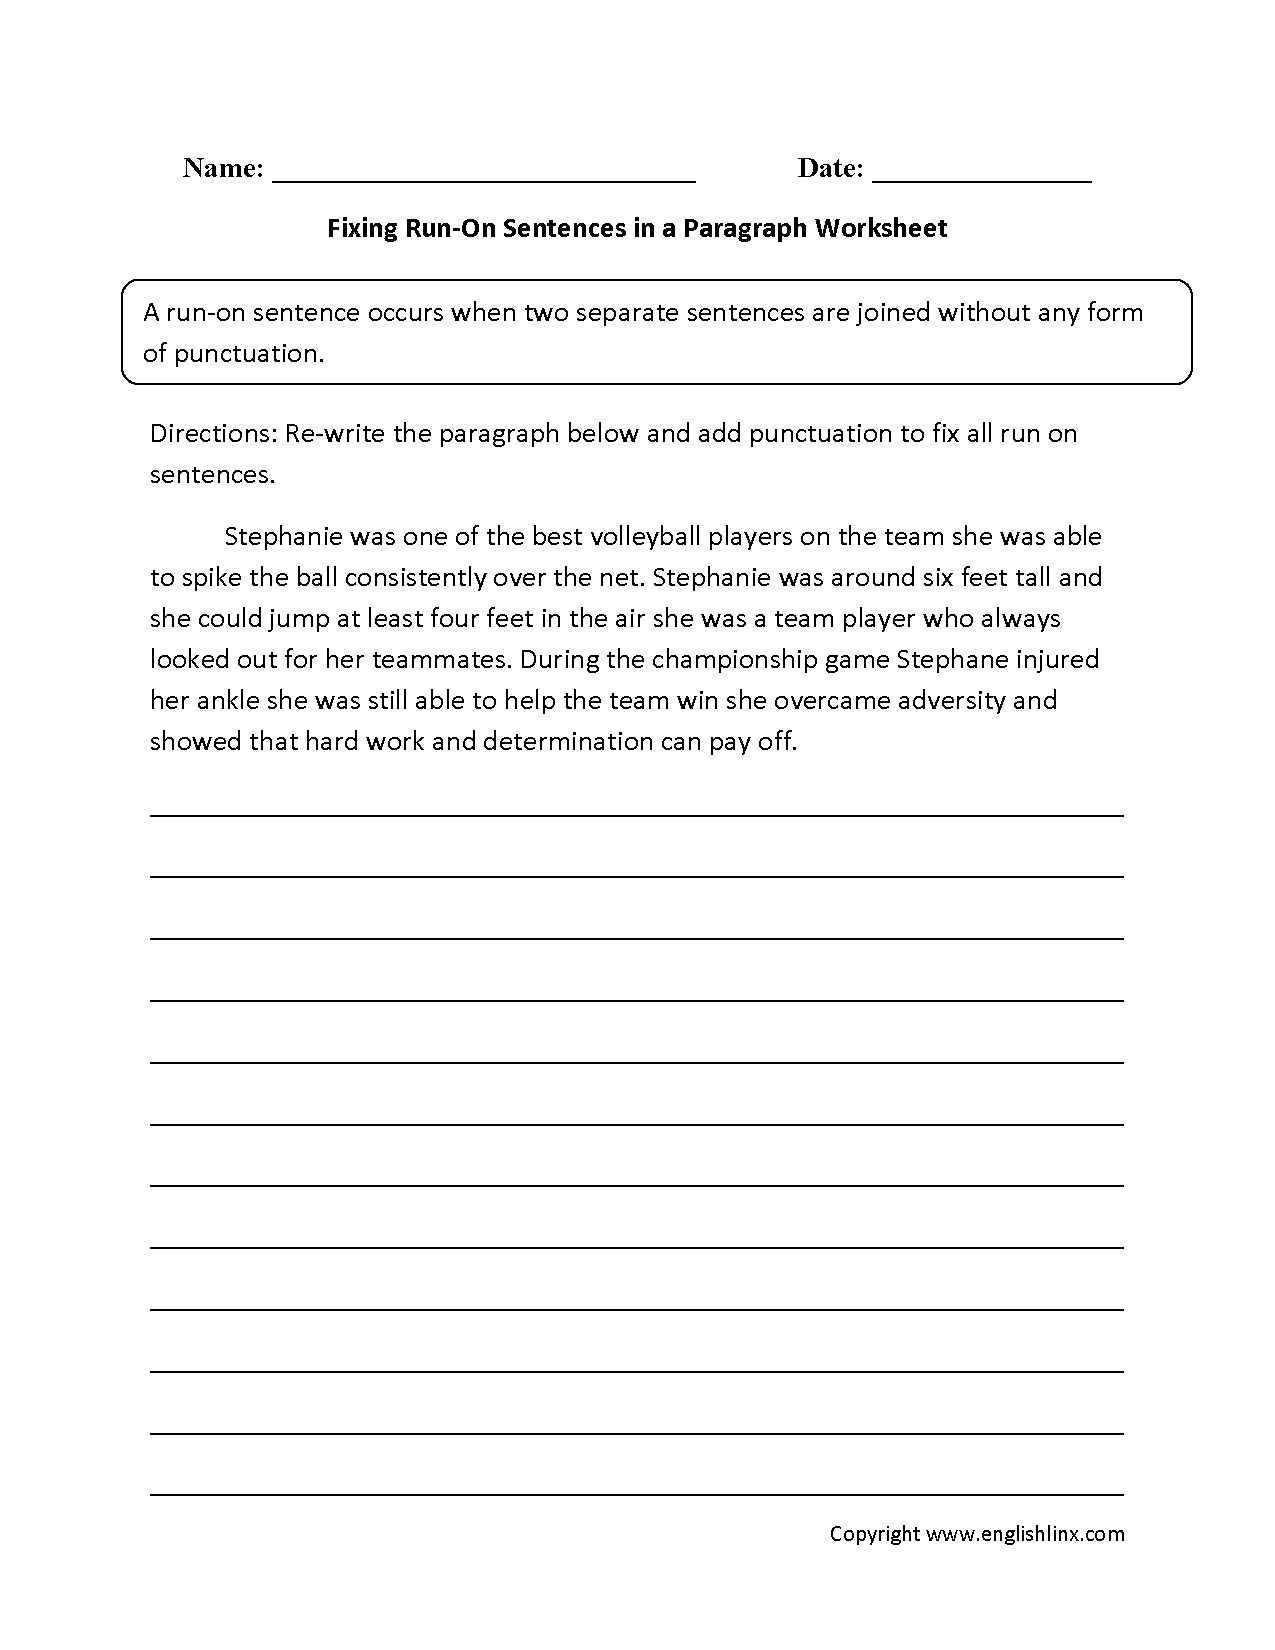 Fixing Paragraphs With Run On Sentences Worksheets | Englishlinx | Proofreading Worksheets Middle School Printable